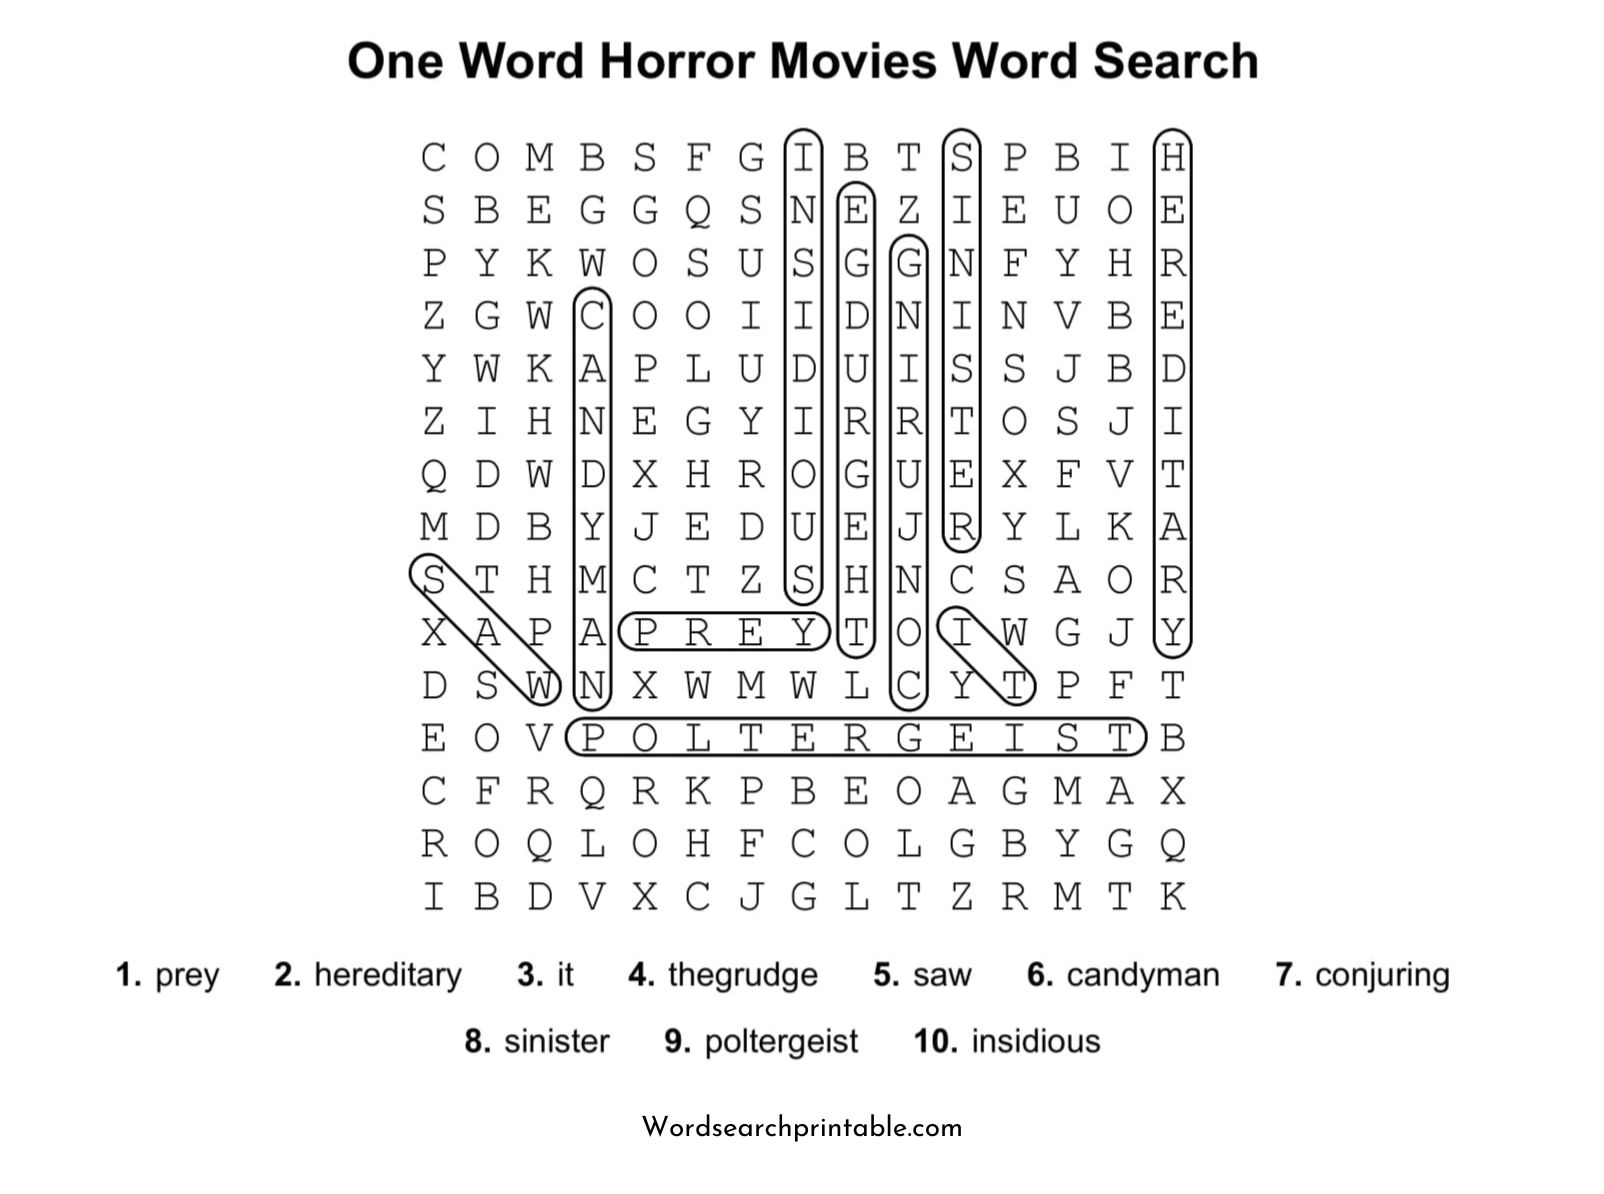 one word horror movies word search puzzle solution